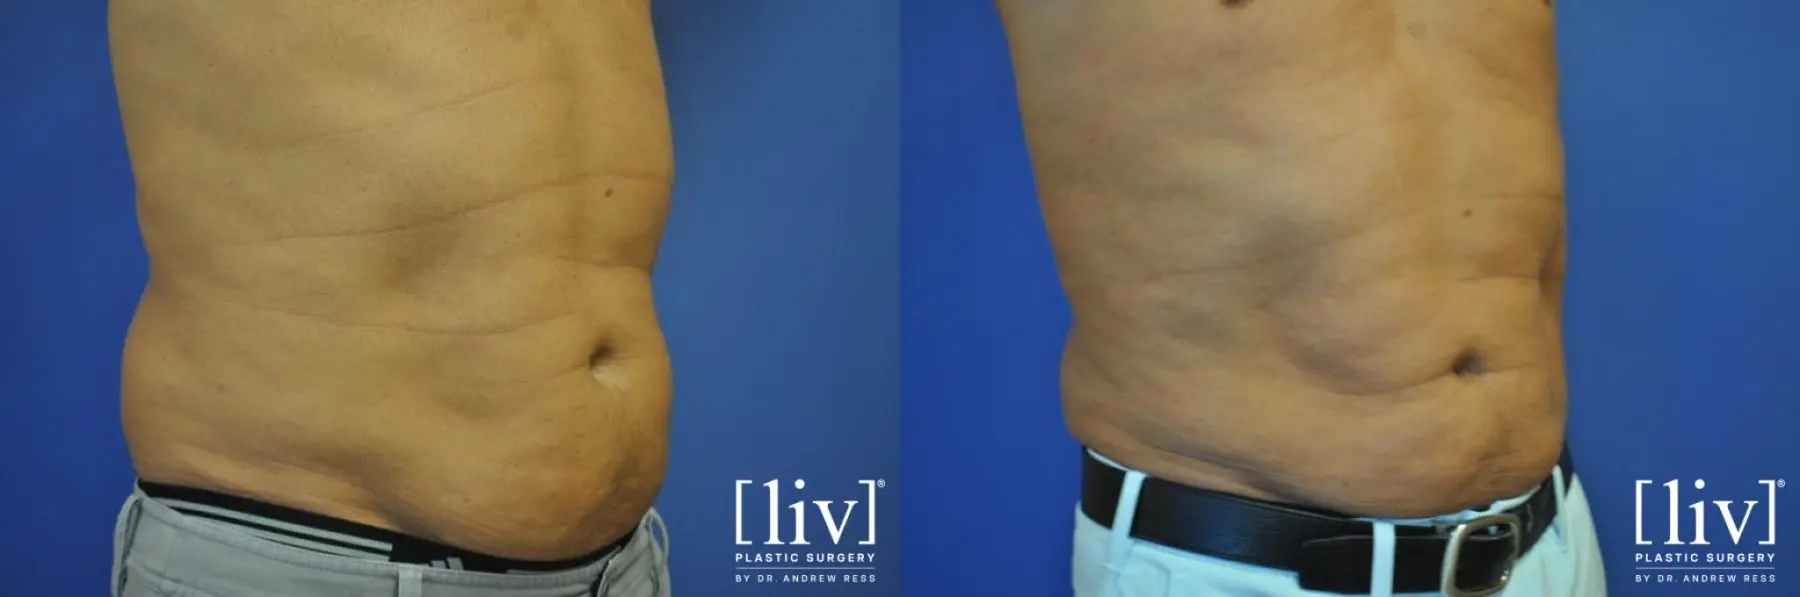 Men Liposuction - Before and After 2